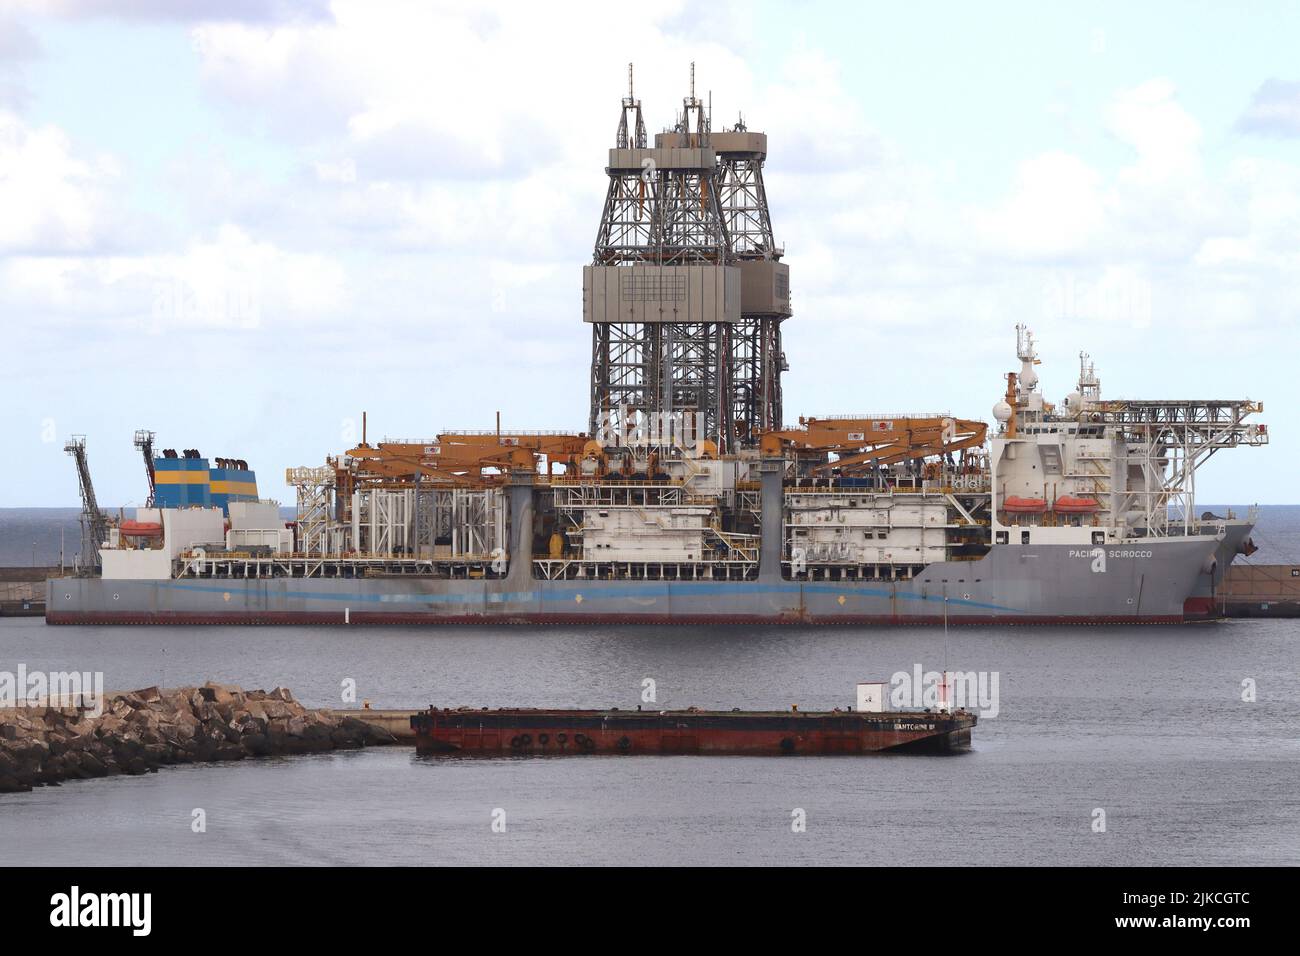 The drilling ship Pacific Scirocco - 60,000 tons - berthed at Las Palmas, Grand Canaria. Stock Photo